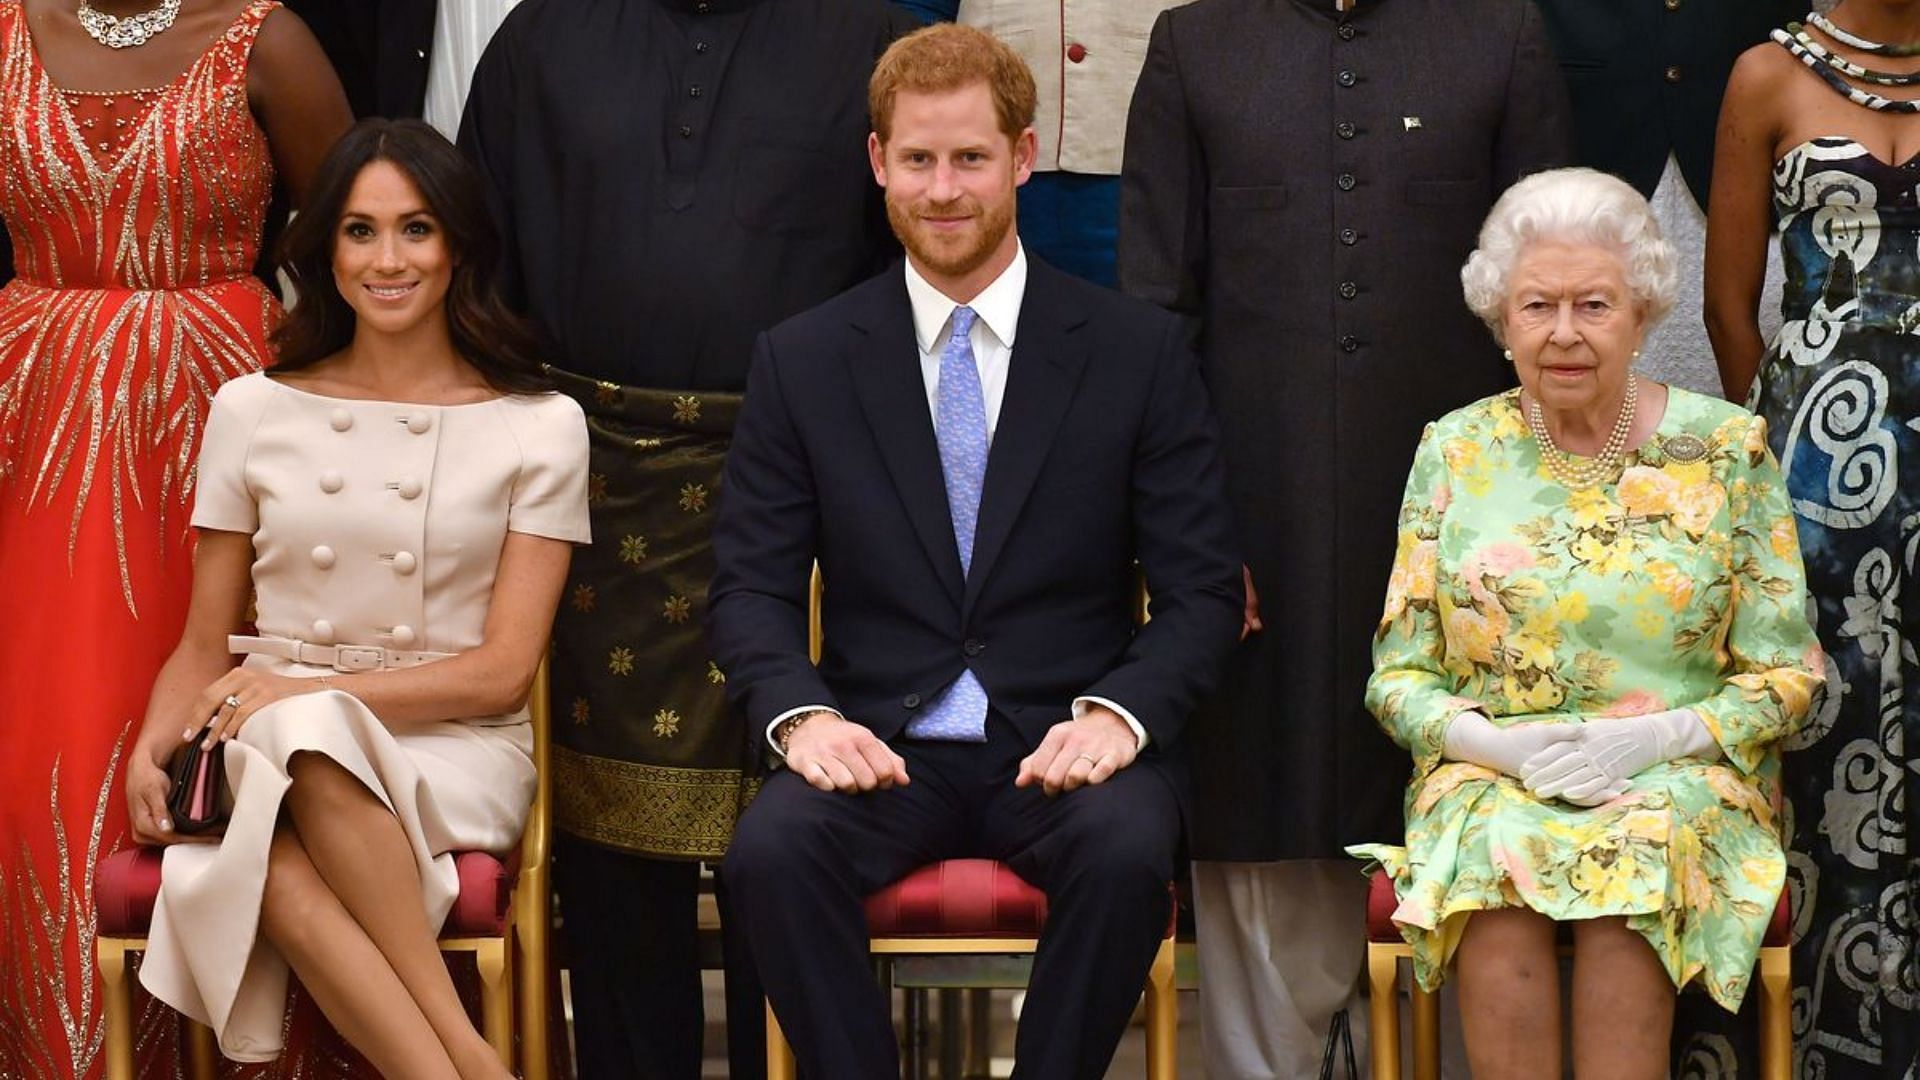 The Duke and Duchess of Sussex along with Queen Elizabeth III. (Image via WPA Pool//Getty Images)